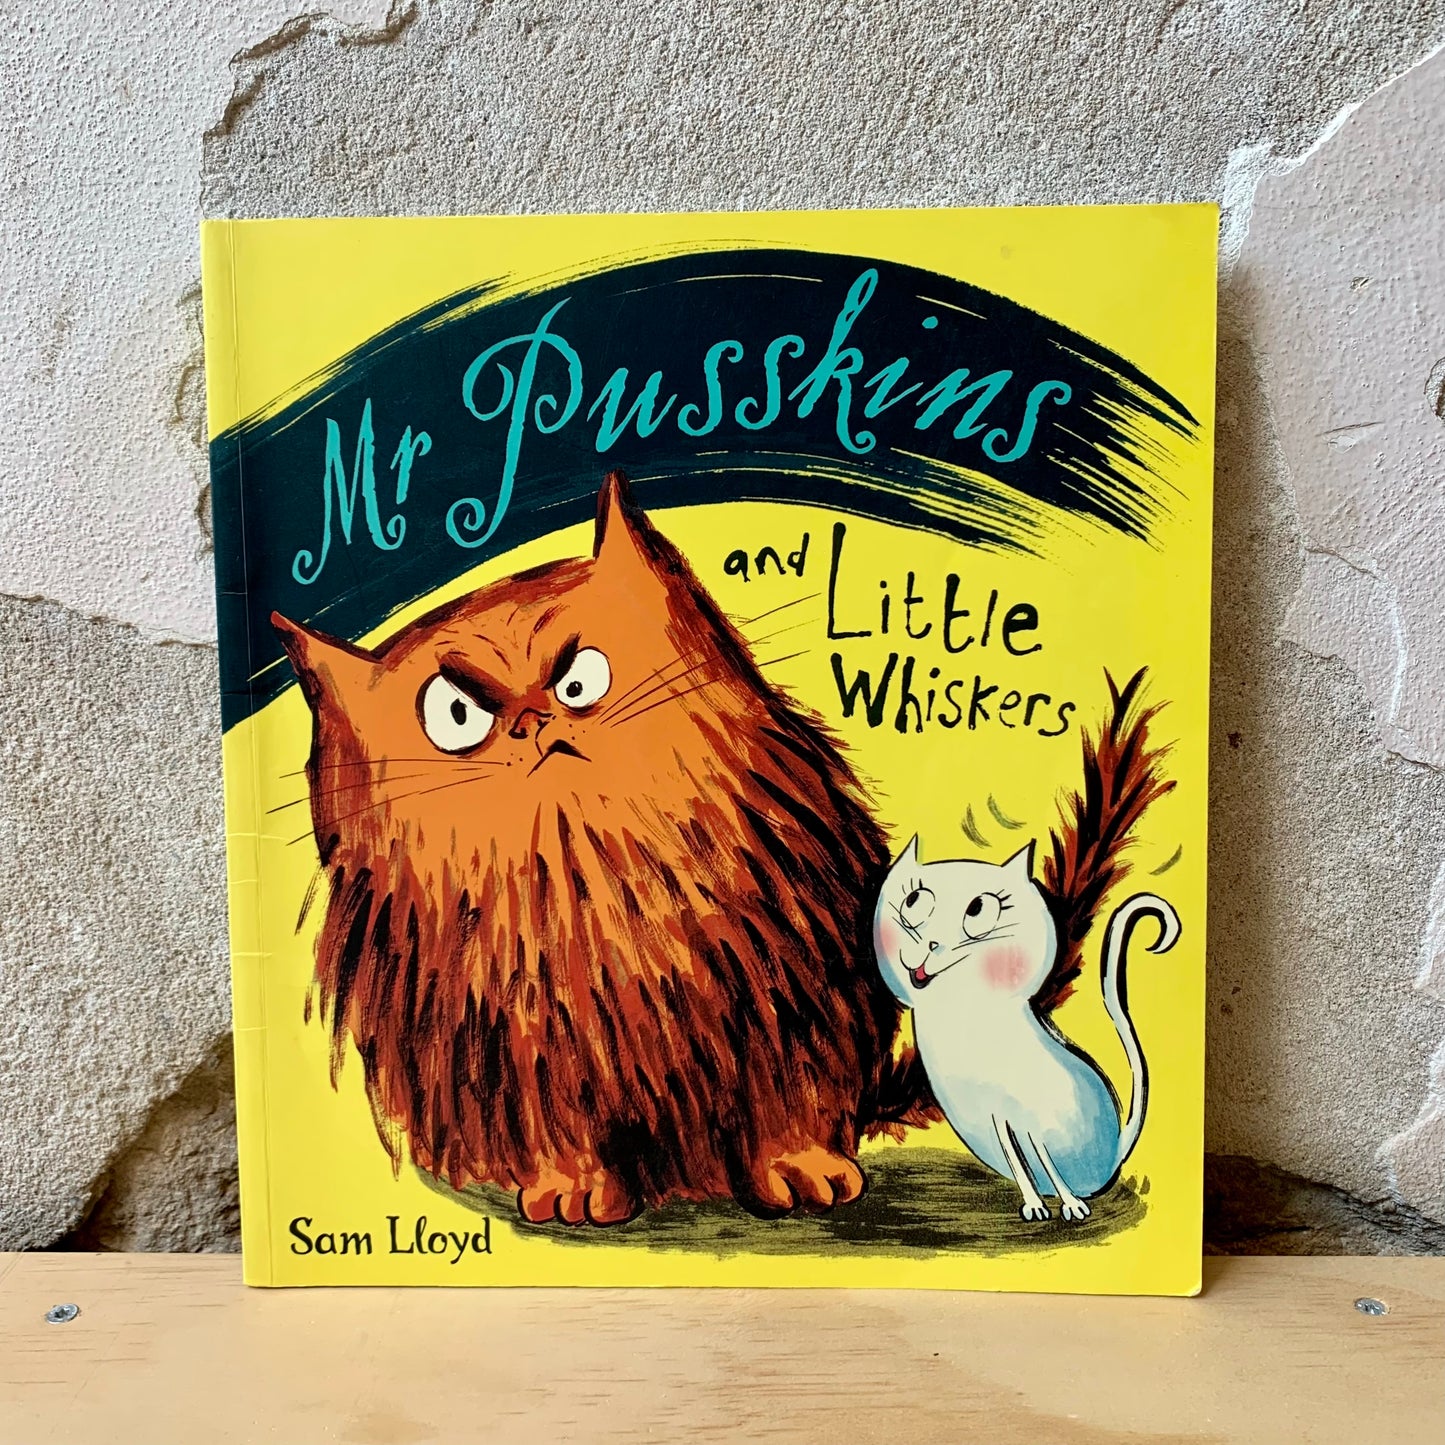 Mr. Pusskins and Little Whiskers – Sam Lloyd